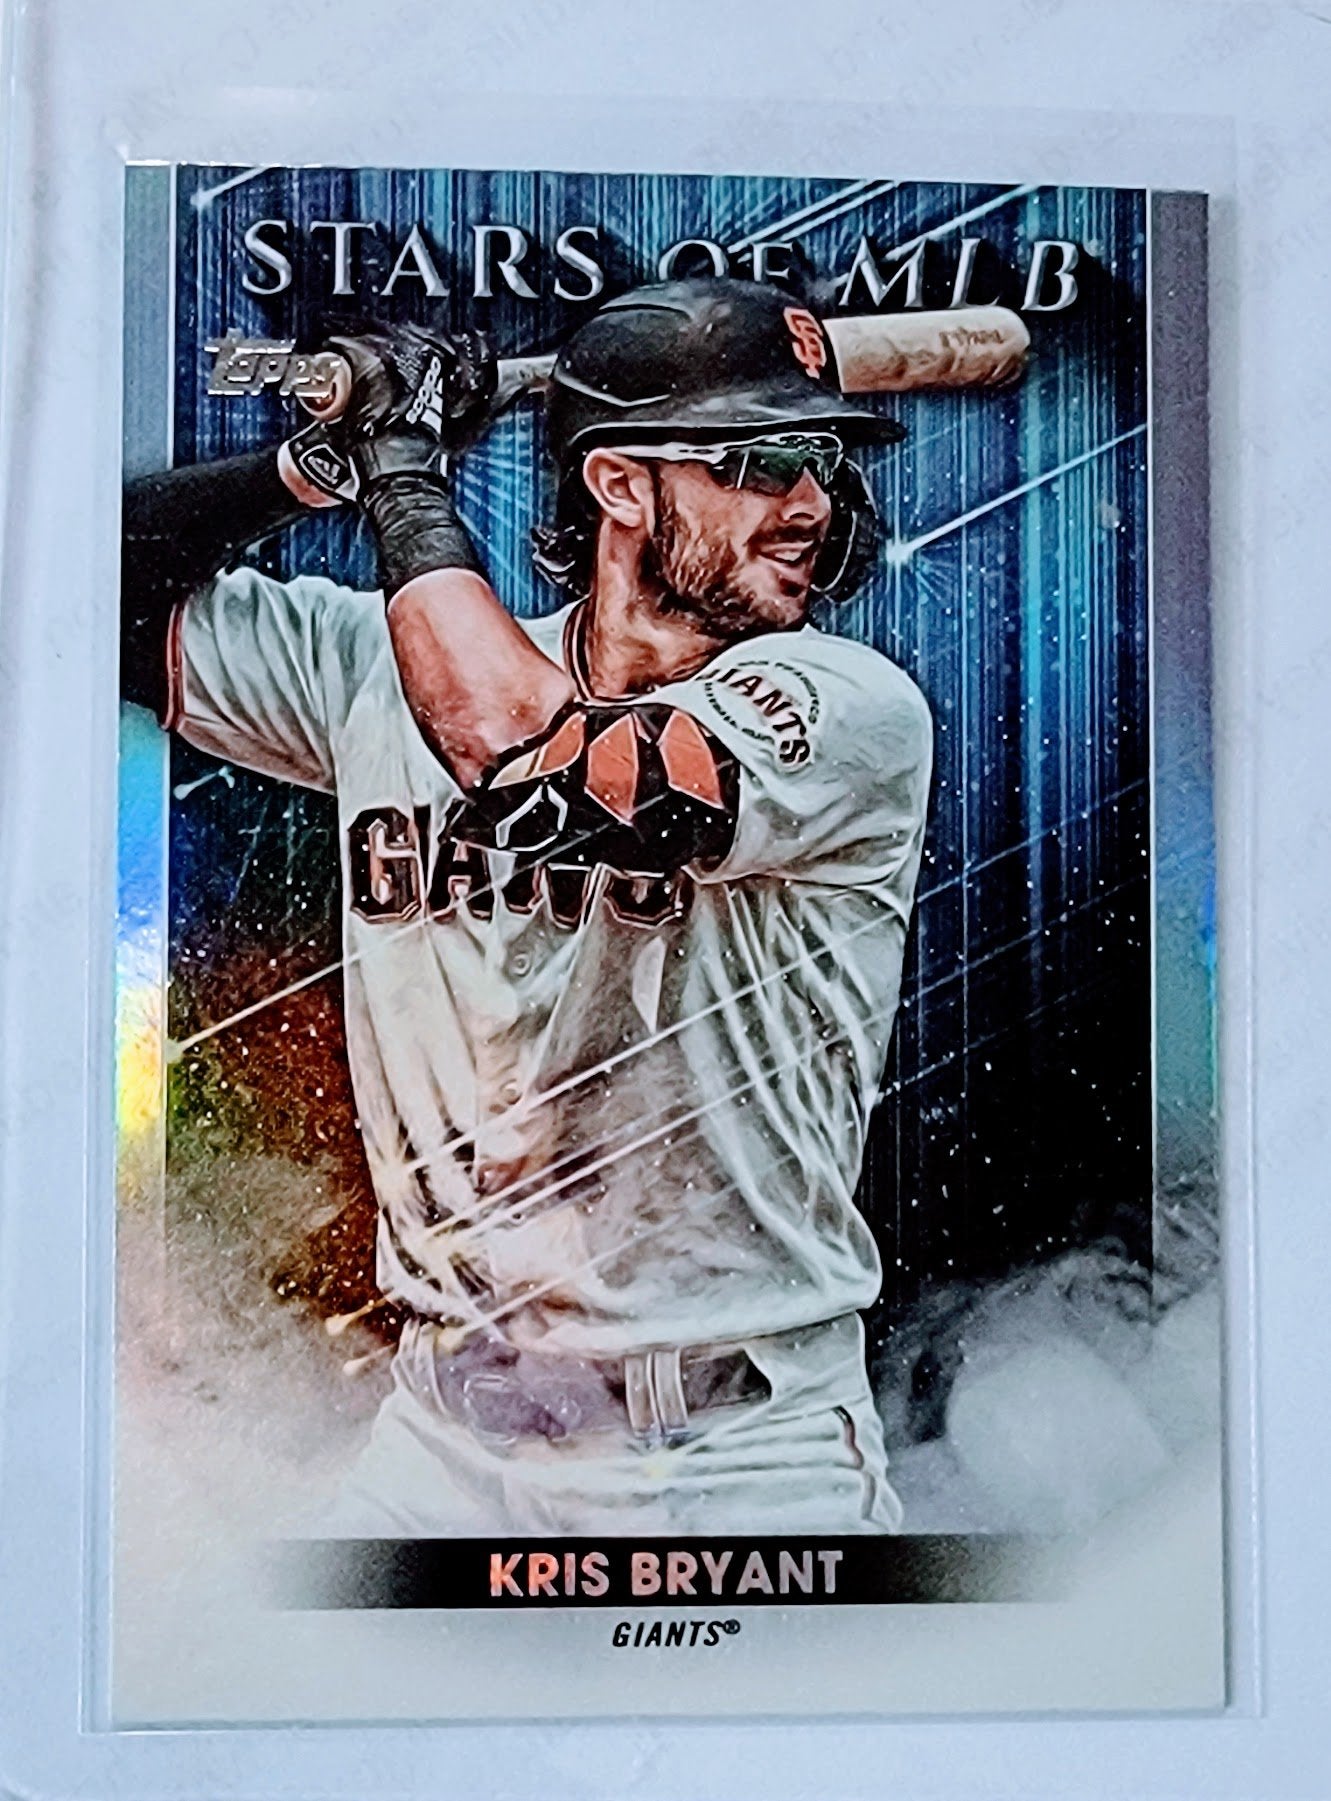 2022 Topps Kris Bryant Stars of the MLB Baseball Trading Card GRB1 simple Xclusive Collectibles   